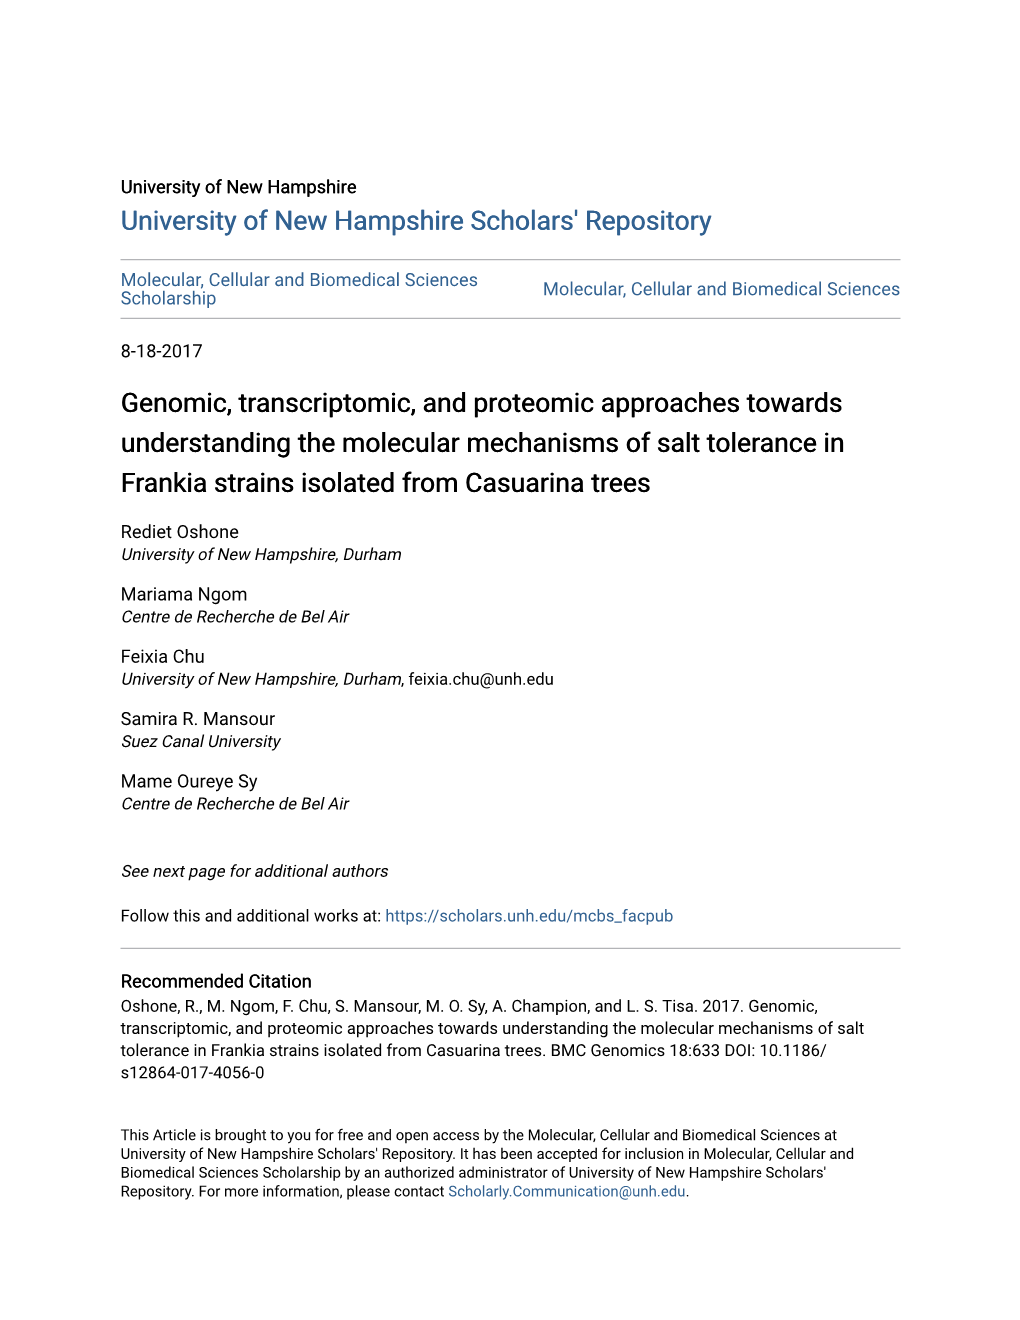 Genomic, Transcriptomic, and Proteomic Approaches Towards Understanding the Molecular Mechanisms of Salt Tolerance in Frankia Strains Isolated from Casuarina Trees